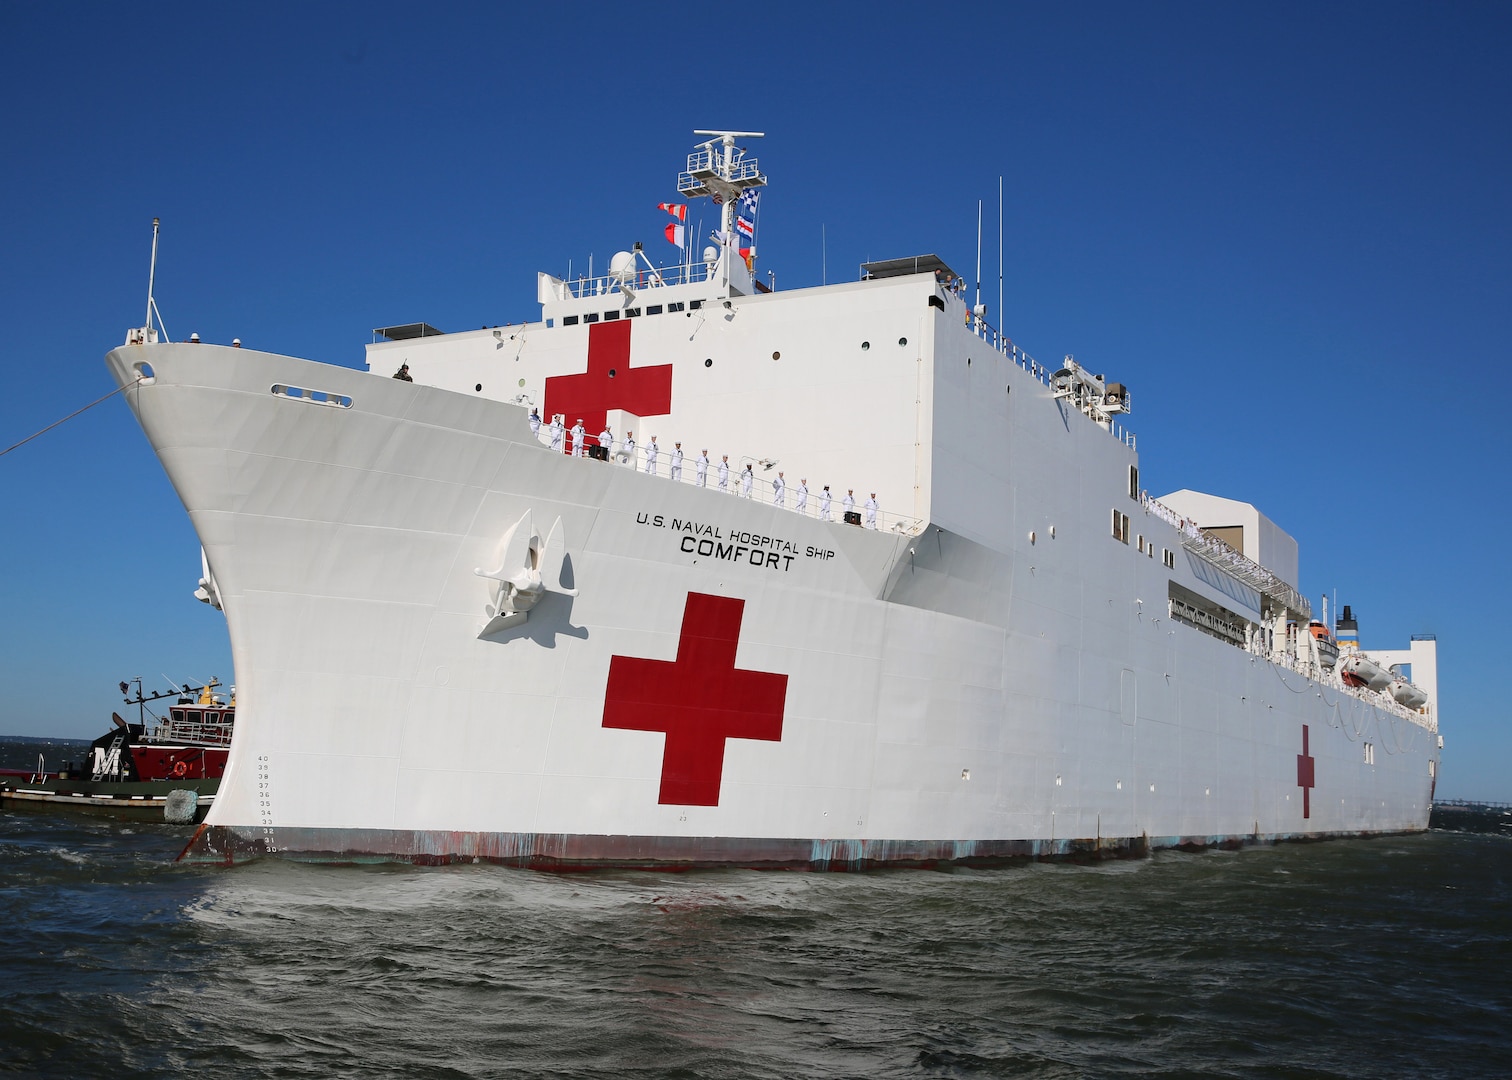 A view of the U.S. Navy Hospital Ship USNS Comfort as it departs Naval Station Norfolk, June 14.